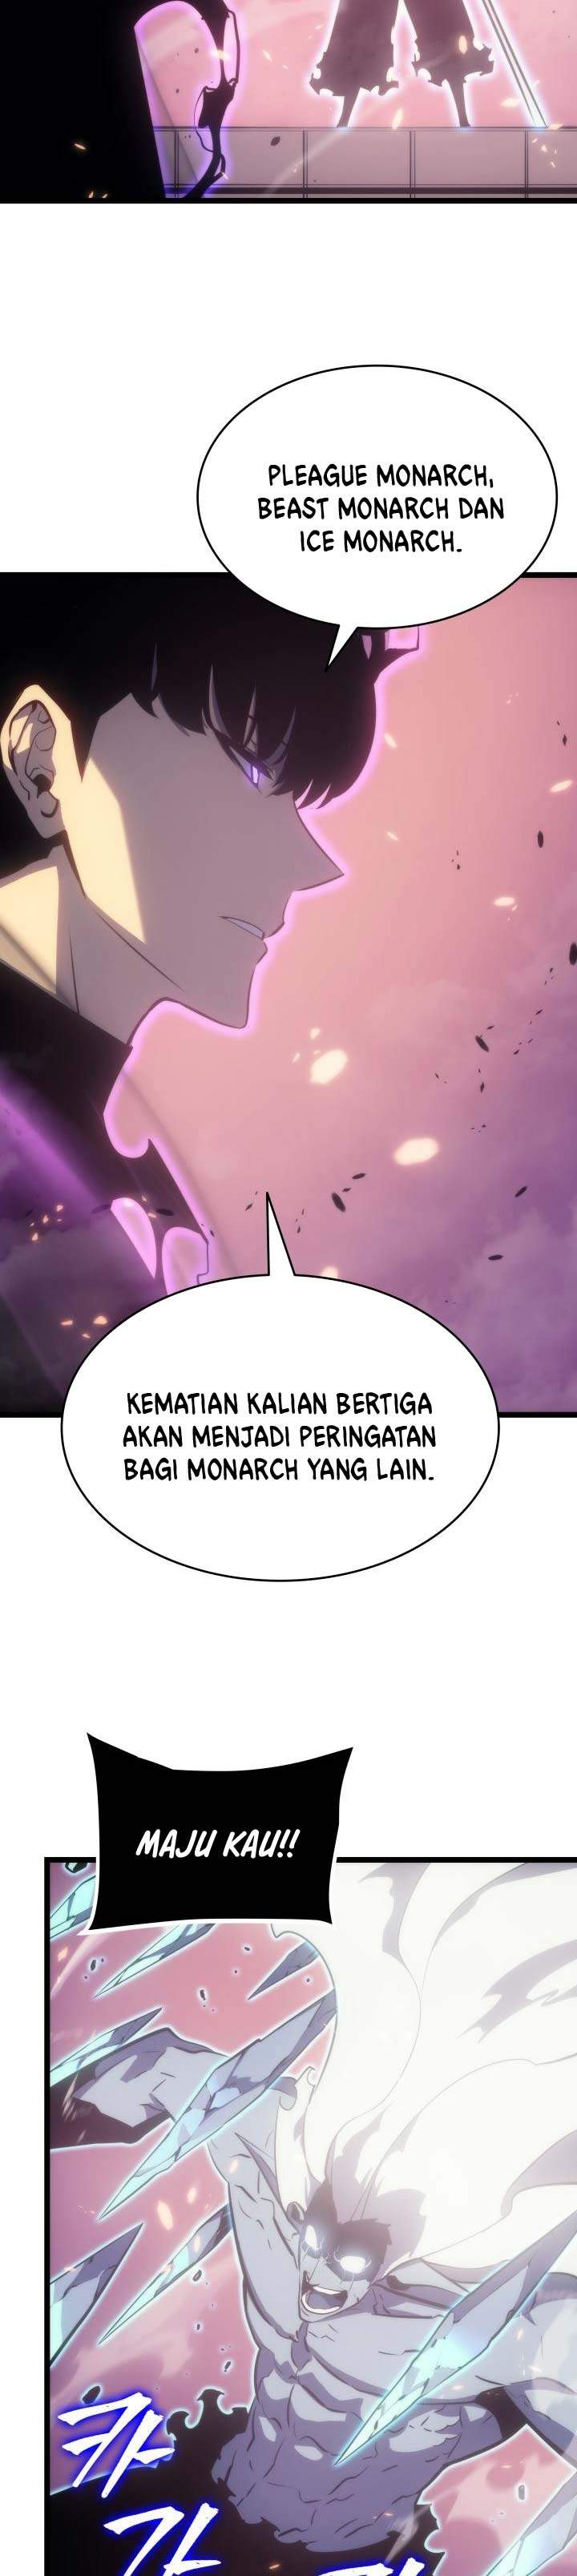 Solo Leveling Chapter 165